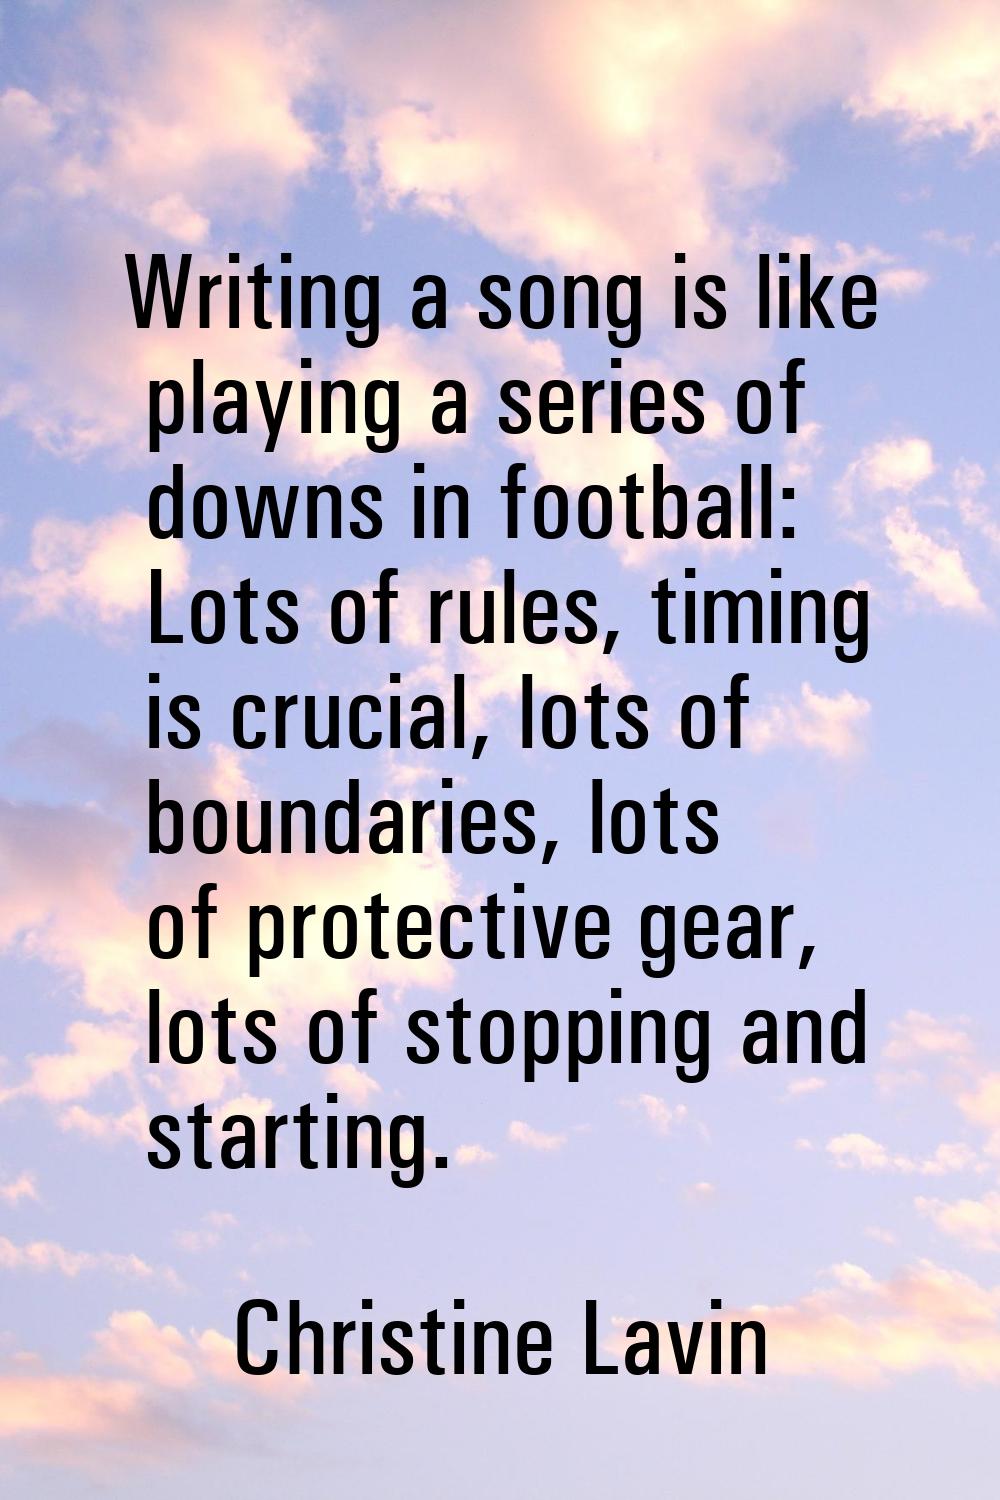 Writing a song is like playing a series of downs in football: Lots of rules, timing is crucial, lot